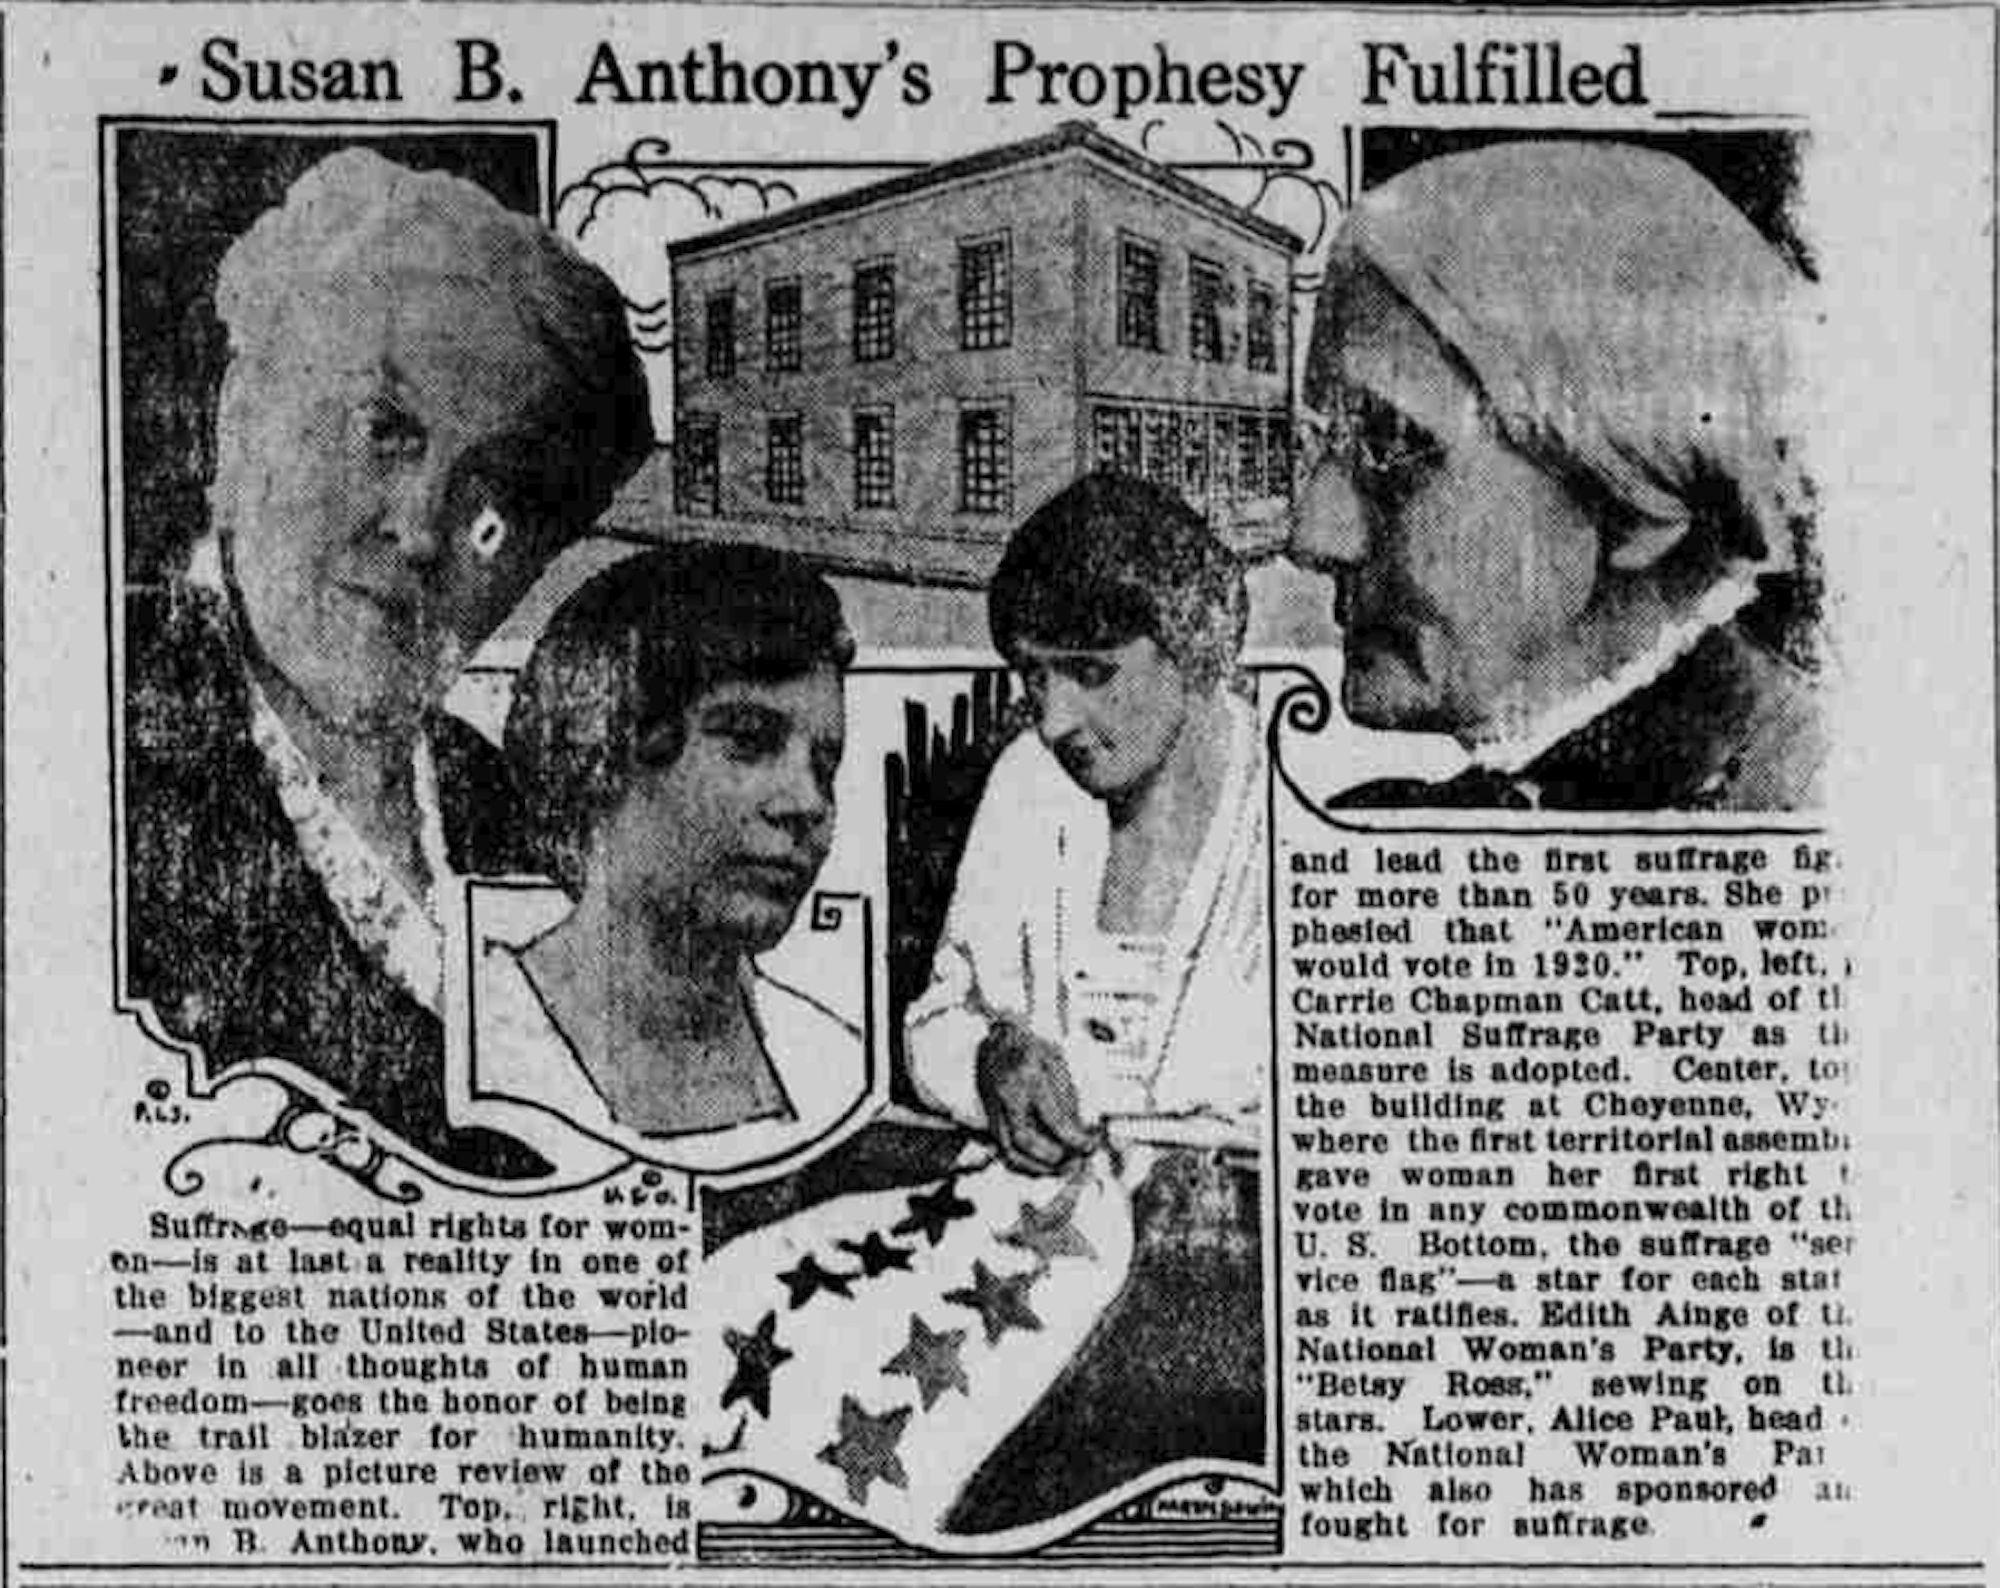 Susan B. Anthony's Prophecy Fulfilled